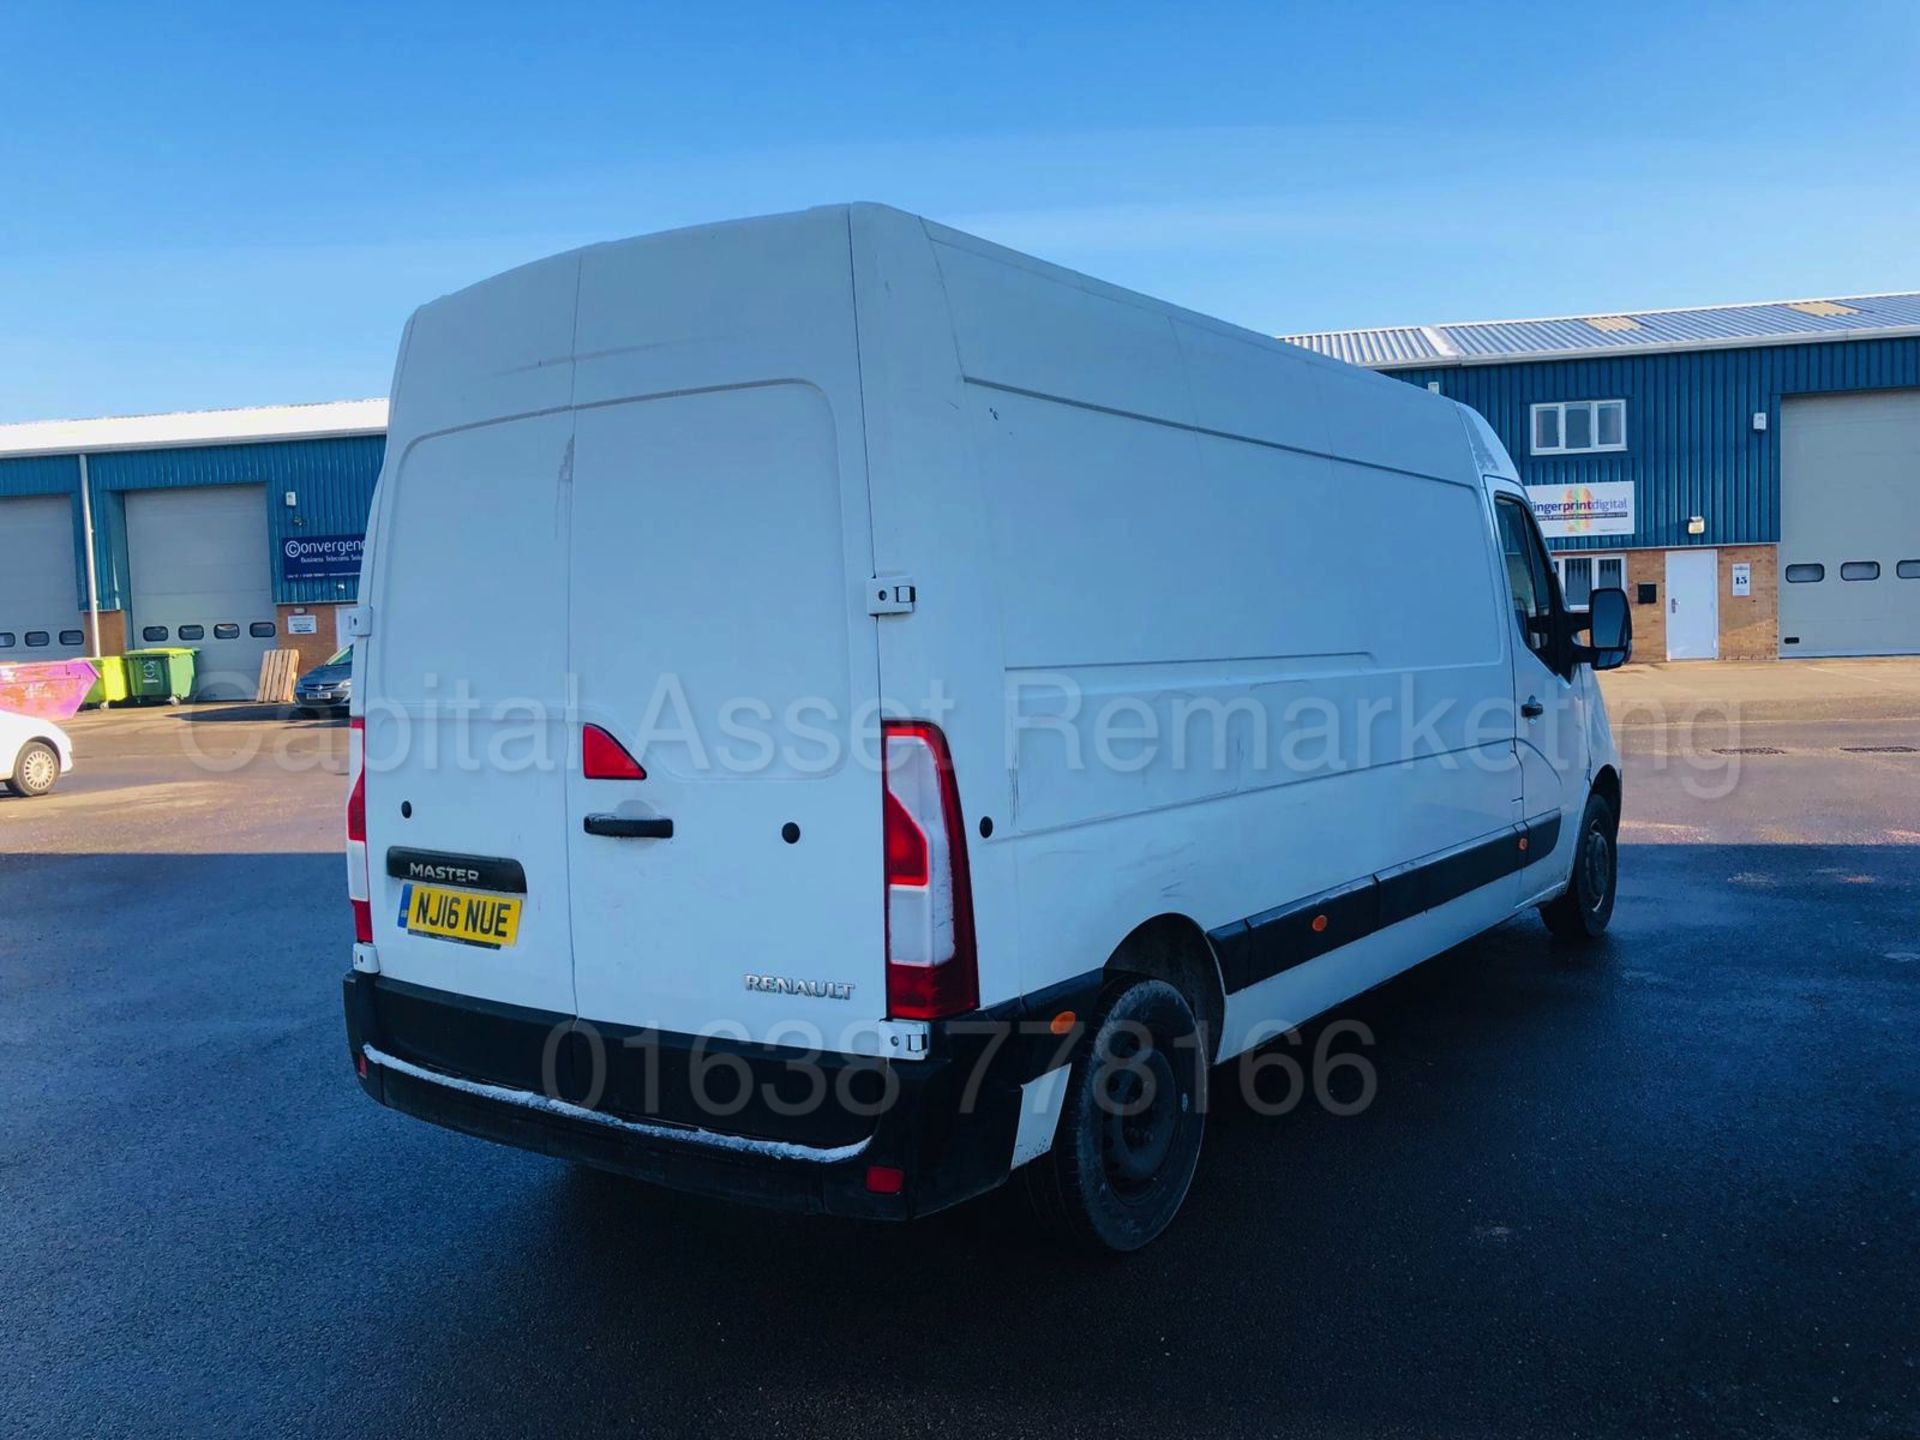 RENAULT MASTER LM35 *LWB - BUSINESS EDITION* (2016) '2.3 DCI - 110 BHP - 6 SPEED' *ULTRA LOW MILES* - Image 8 of 23